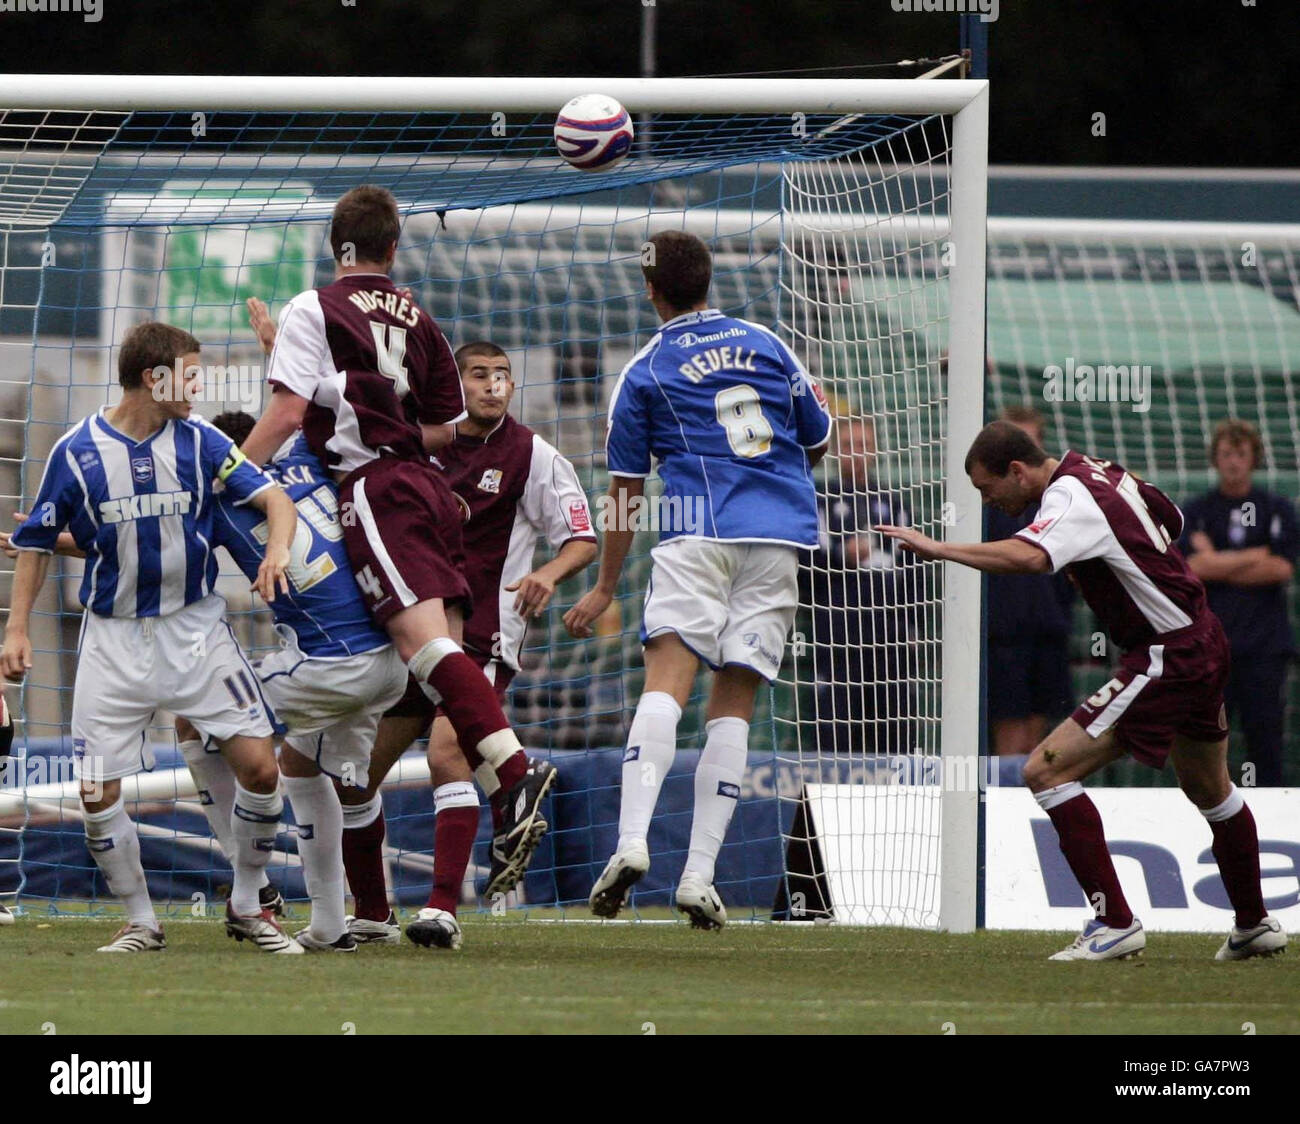 Soccer - Coca-Cola Football League One - Brighton and Hove Albion v Northampton Town - The Withdean Stadium. Brighton's Alex Revell heads the winning goal during the Coca-Cola Football League One match at the Withdean Stadium, Brighton. Stock Photo